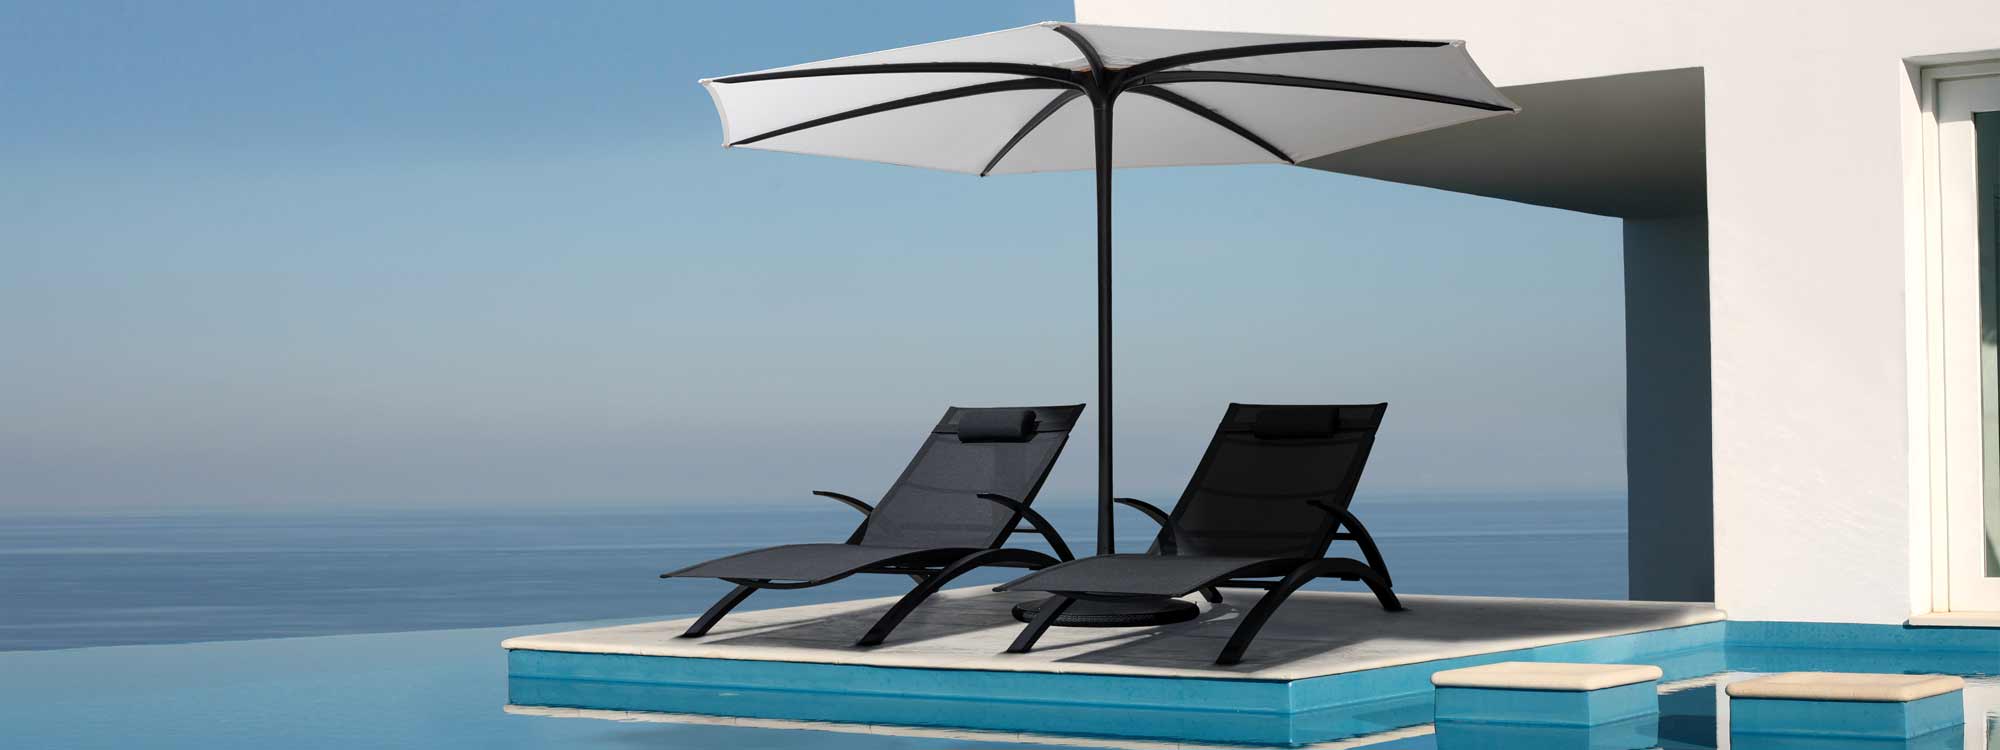 Palma parasol & OZN 195T modern garden sun lounger is a quality adjustable sun bed in all weather sun bed materials by Royal Botania modern garden furniture